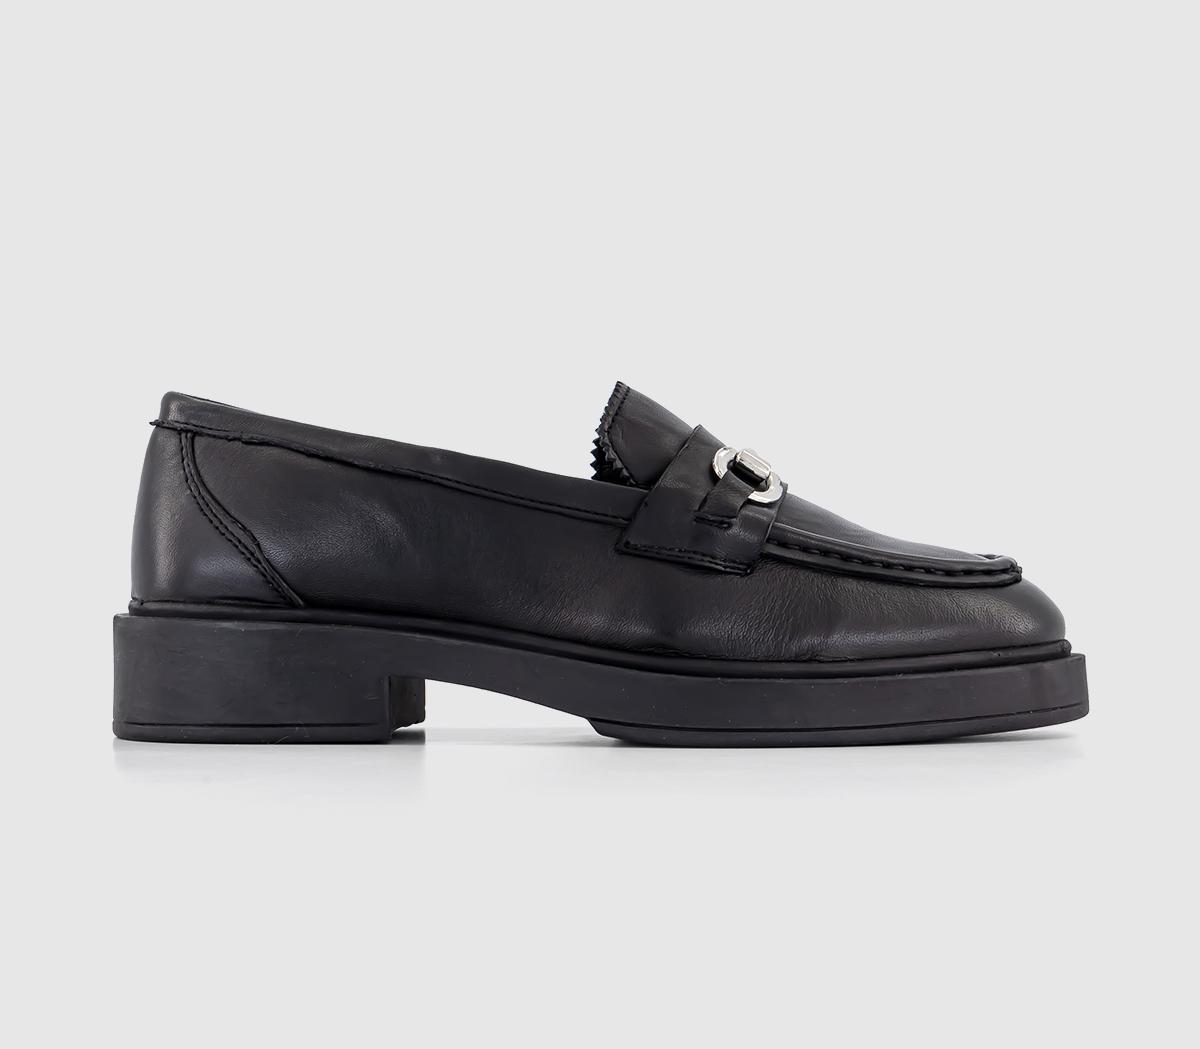 OFFICE Fidgeting Leather Trim Penny Loafers Black Leather - Flat Shoes ...